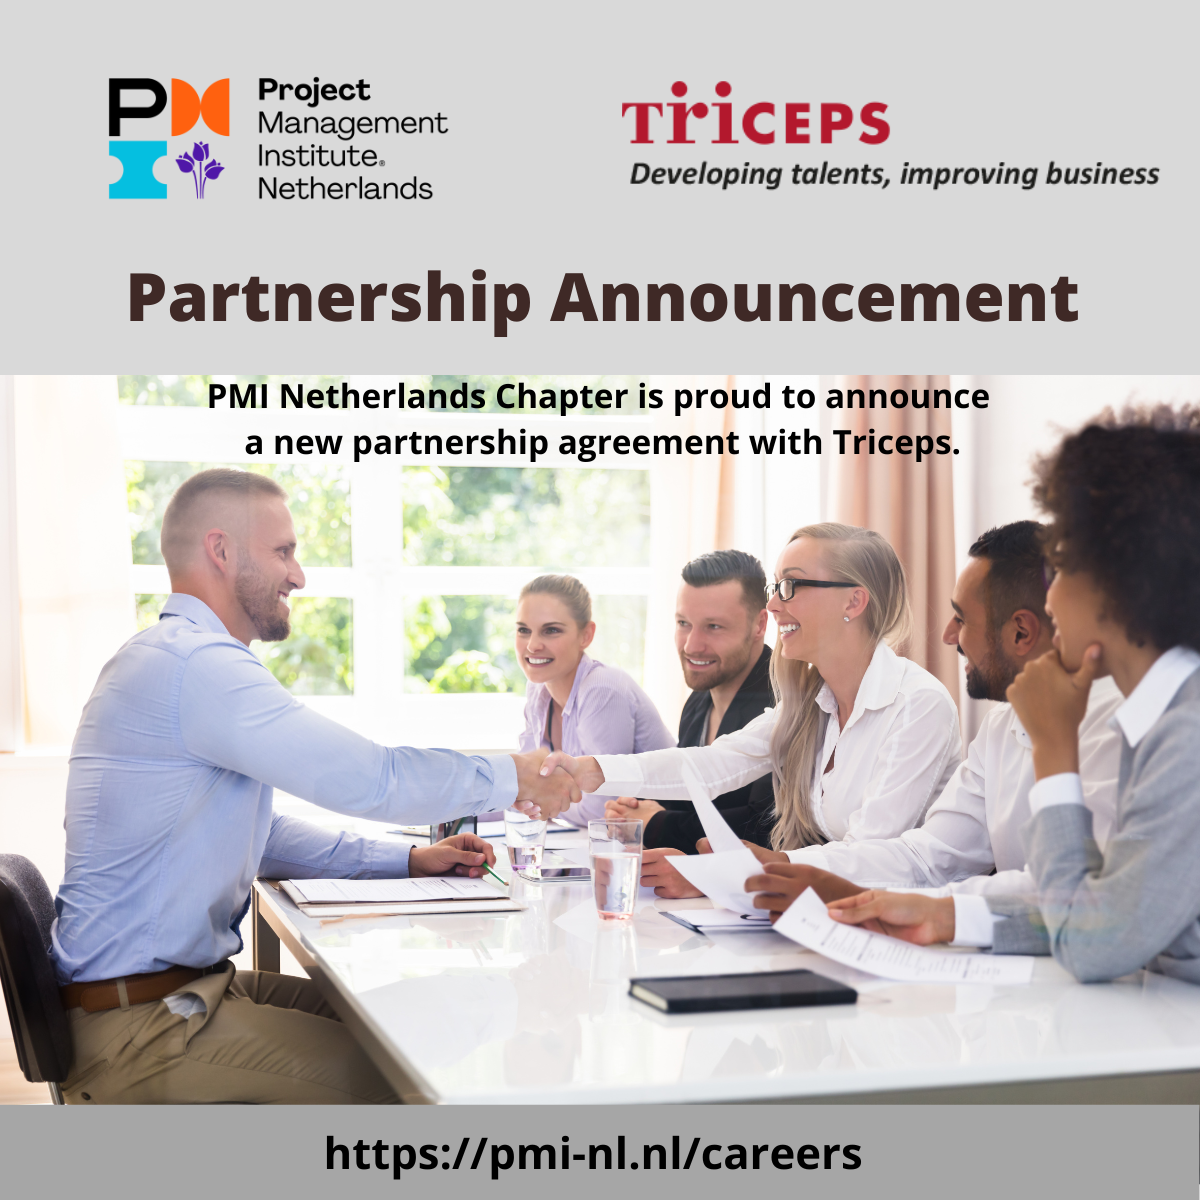 Triceps Partnership - We are proud to announce that our Chapter has entered into a partnership agreement with Triceps. READ MORE.